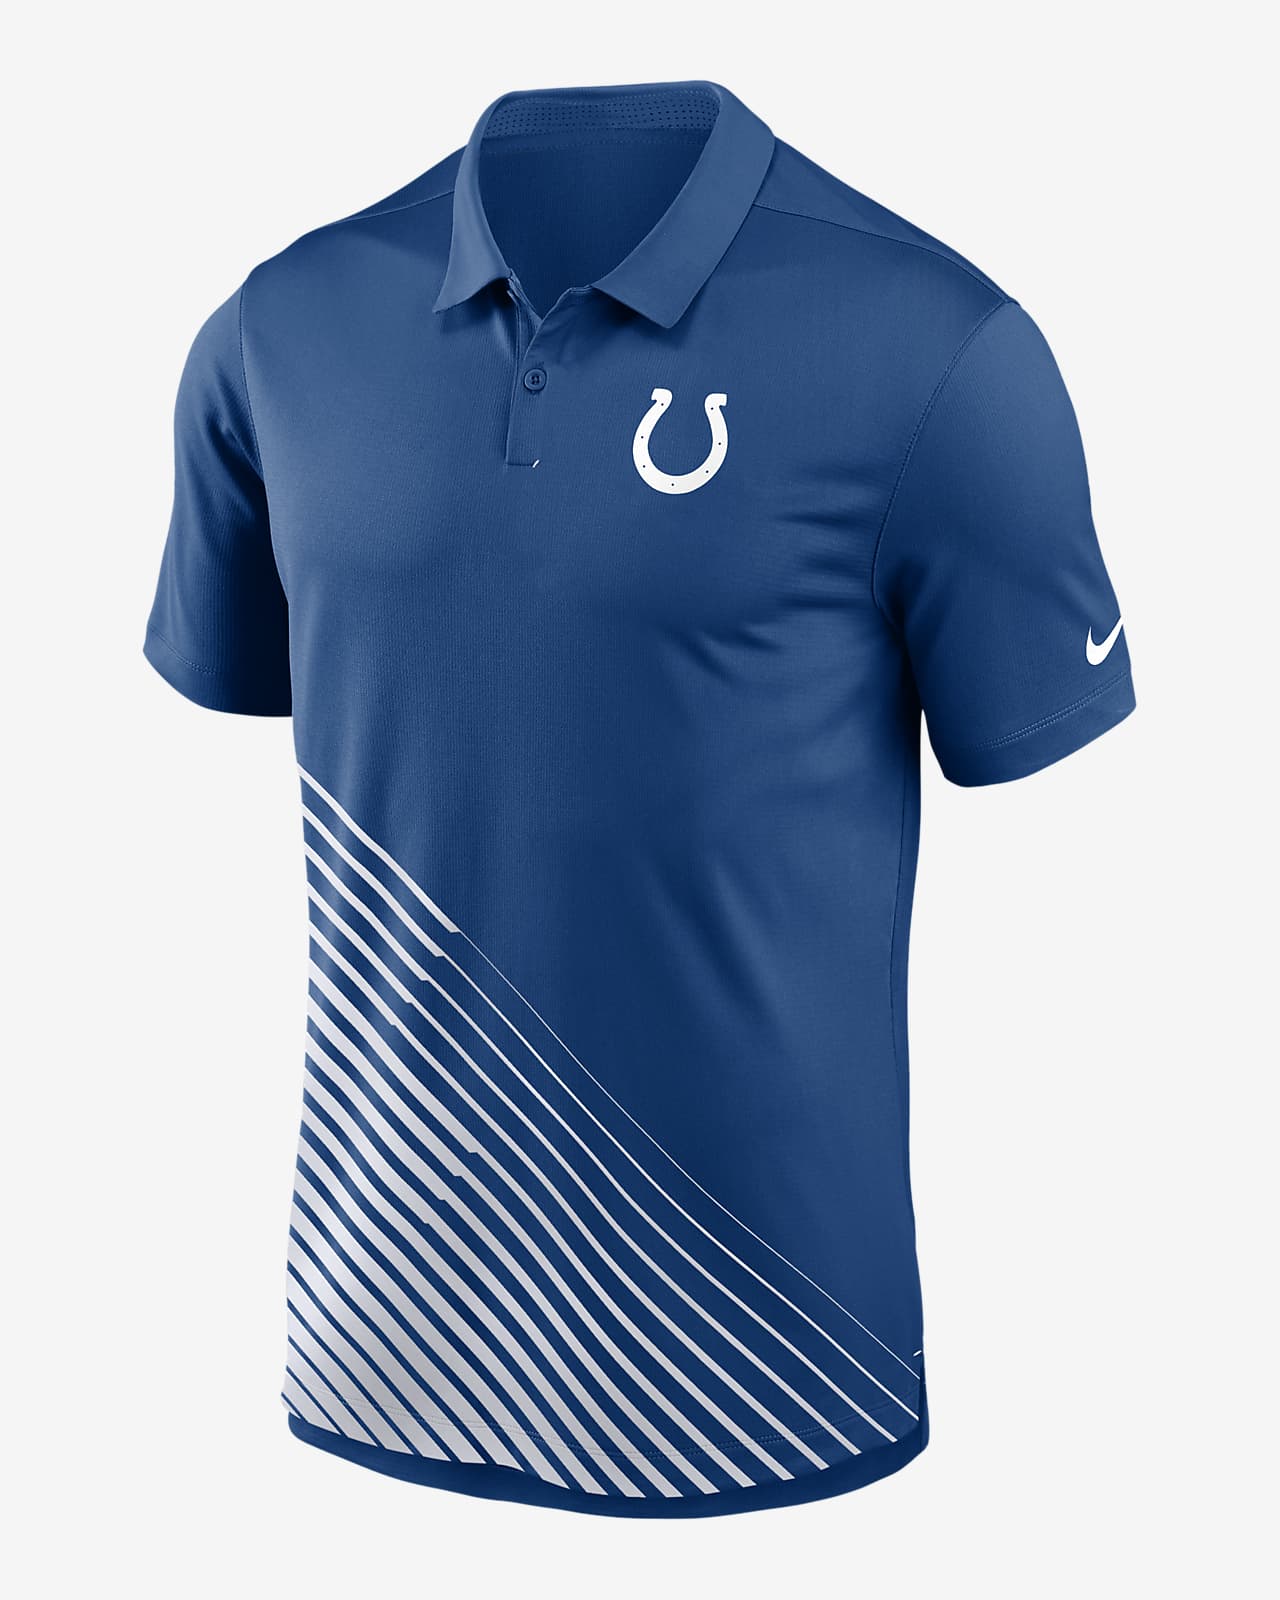 Nike Dri-FIT Yard Line (NFL Indianapolis Colts) Men's Polo